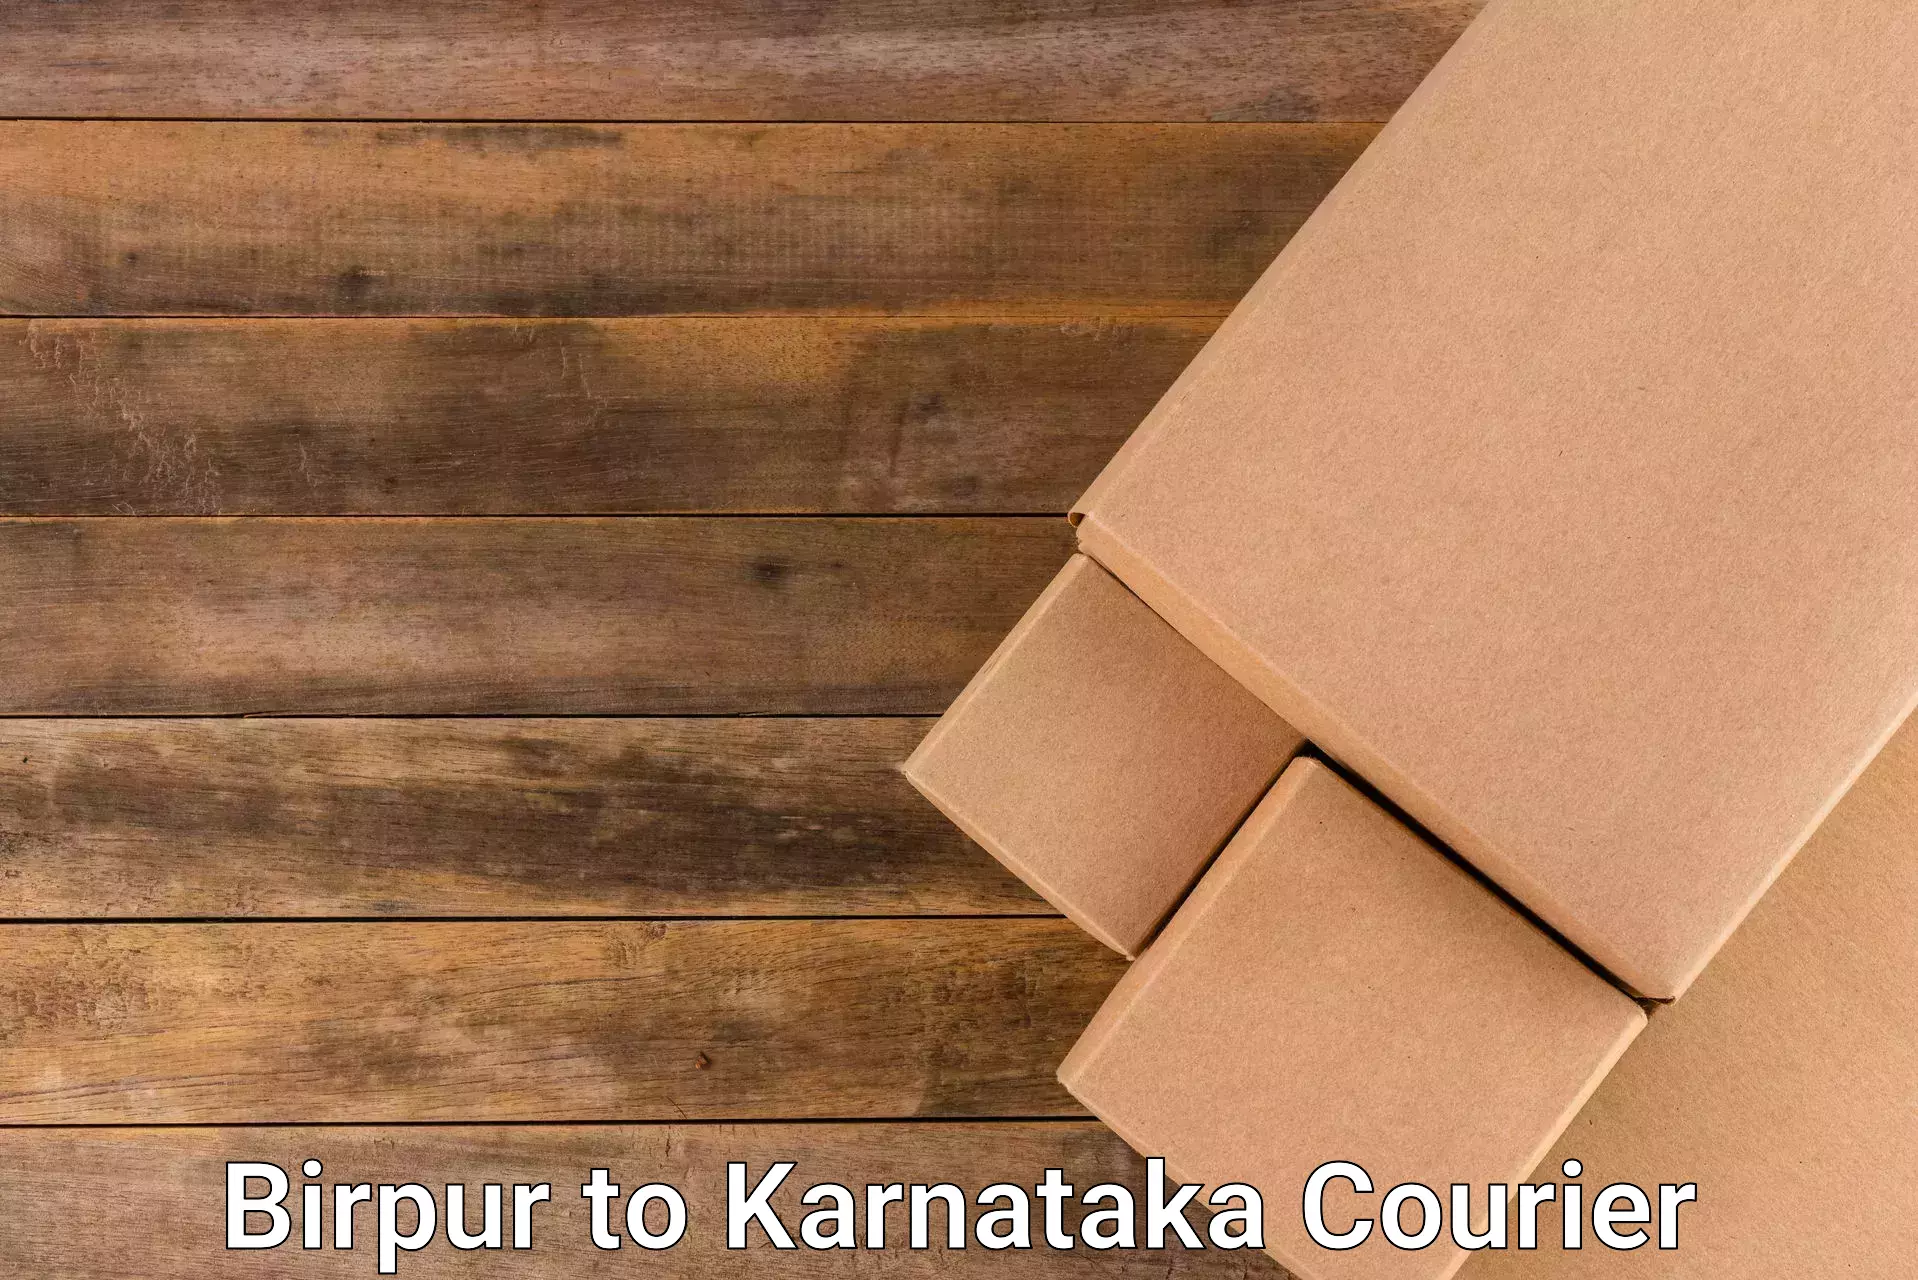 State-of-the-art courier technology Birpur to Yaragatti